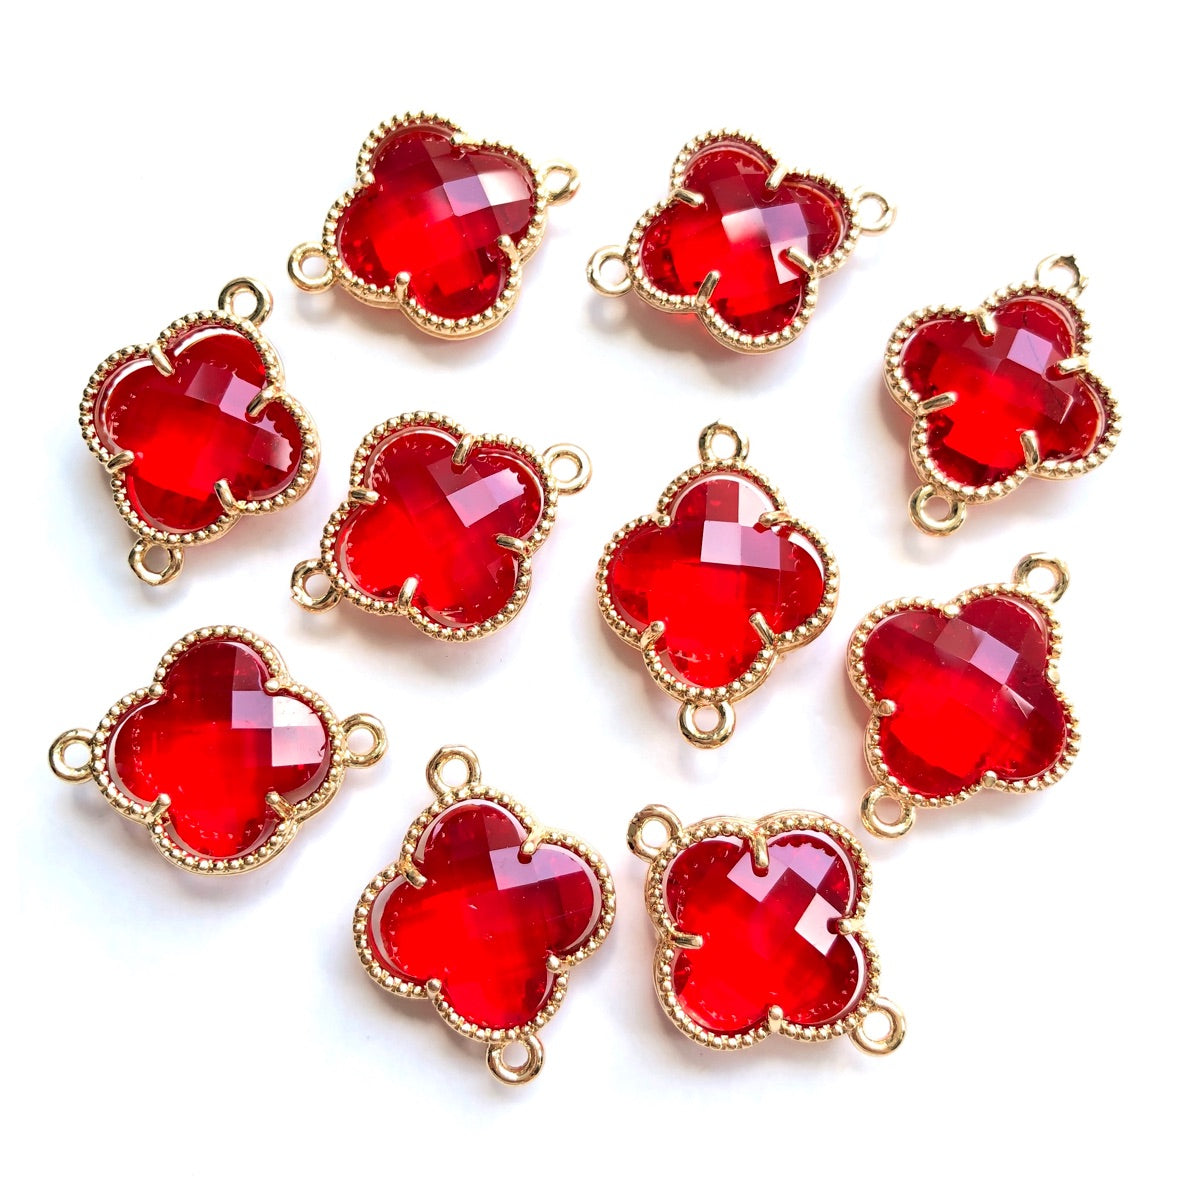 10pcs/Lot Gold Plated Glass Crystal Clover Flower Connectors Red Stone Charms Flower Glass Beads New Charms Arrivals Charms Beads Beyond